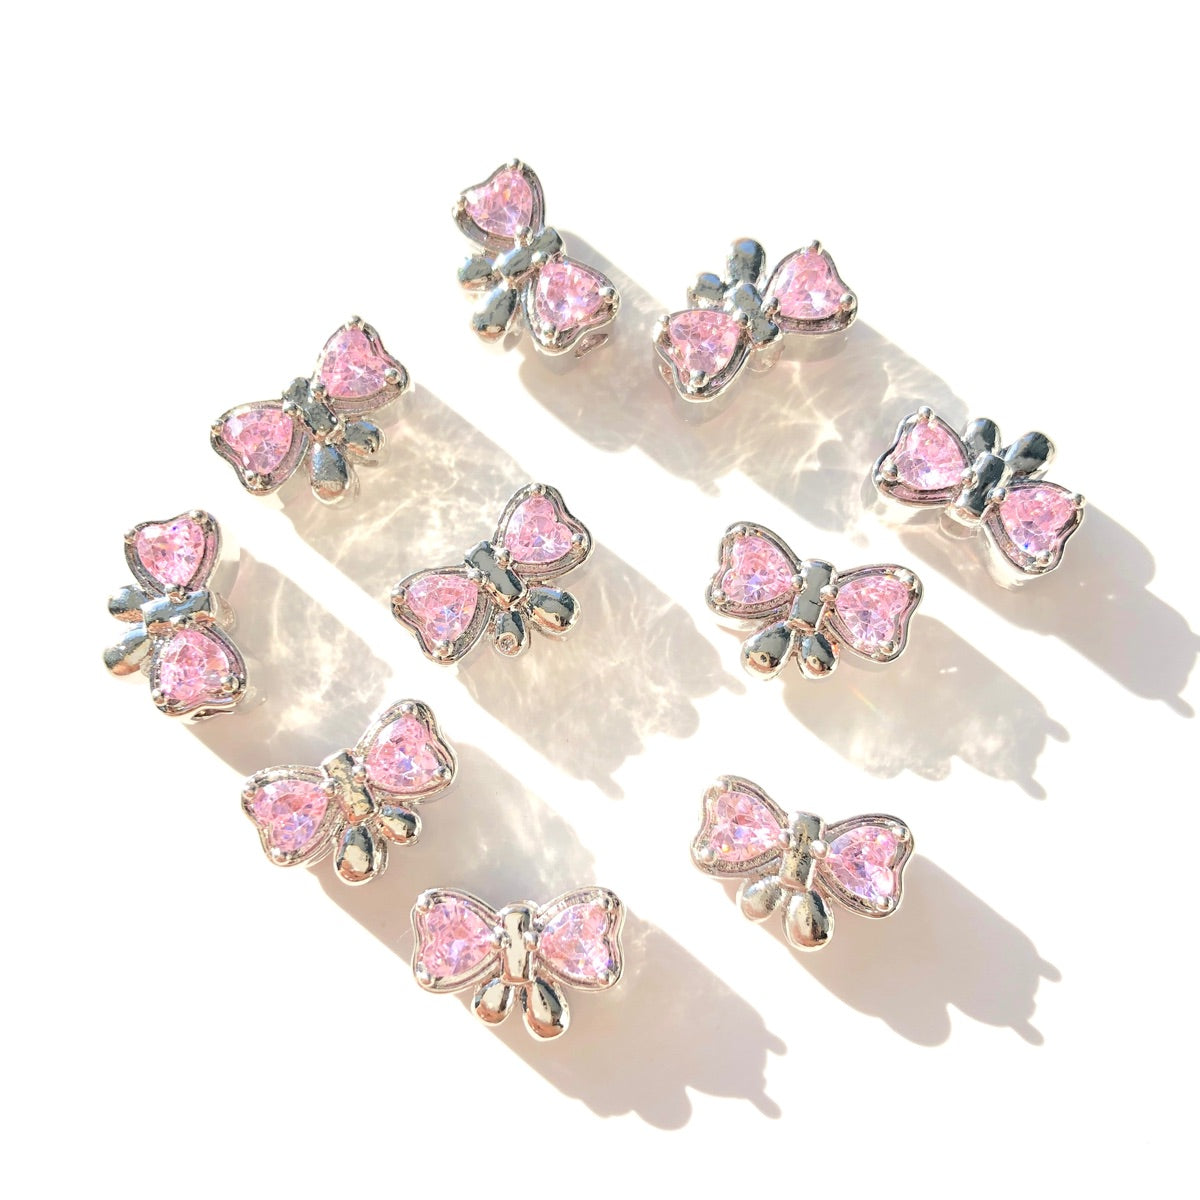 10-20-50pcs/lot Pink Heart CZ Paved Bow Tie Spacers Silver CZ Paved Spacers Big Hole Beads New Spacers Arrivals Rondelle Beads Wholesale Charms Beads Beyond